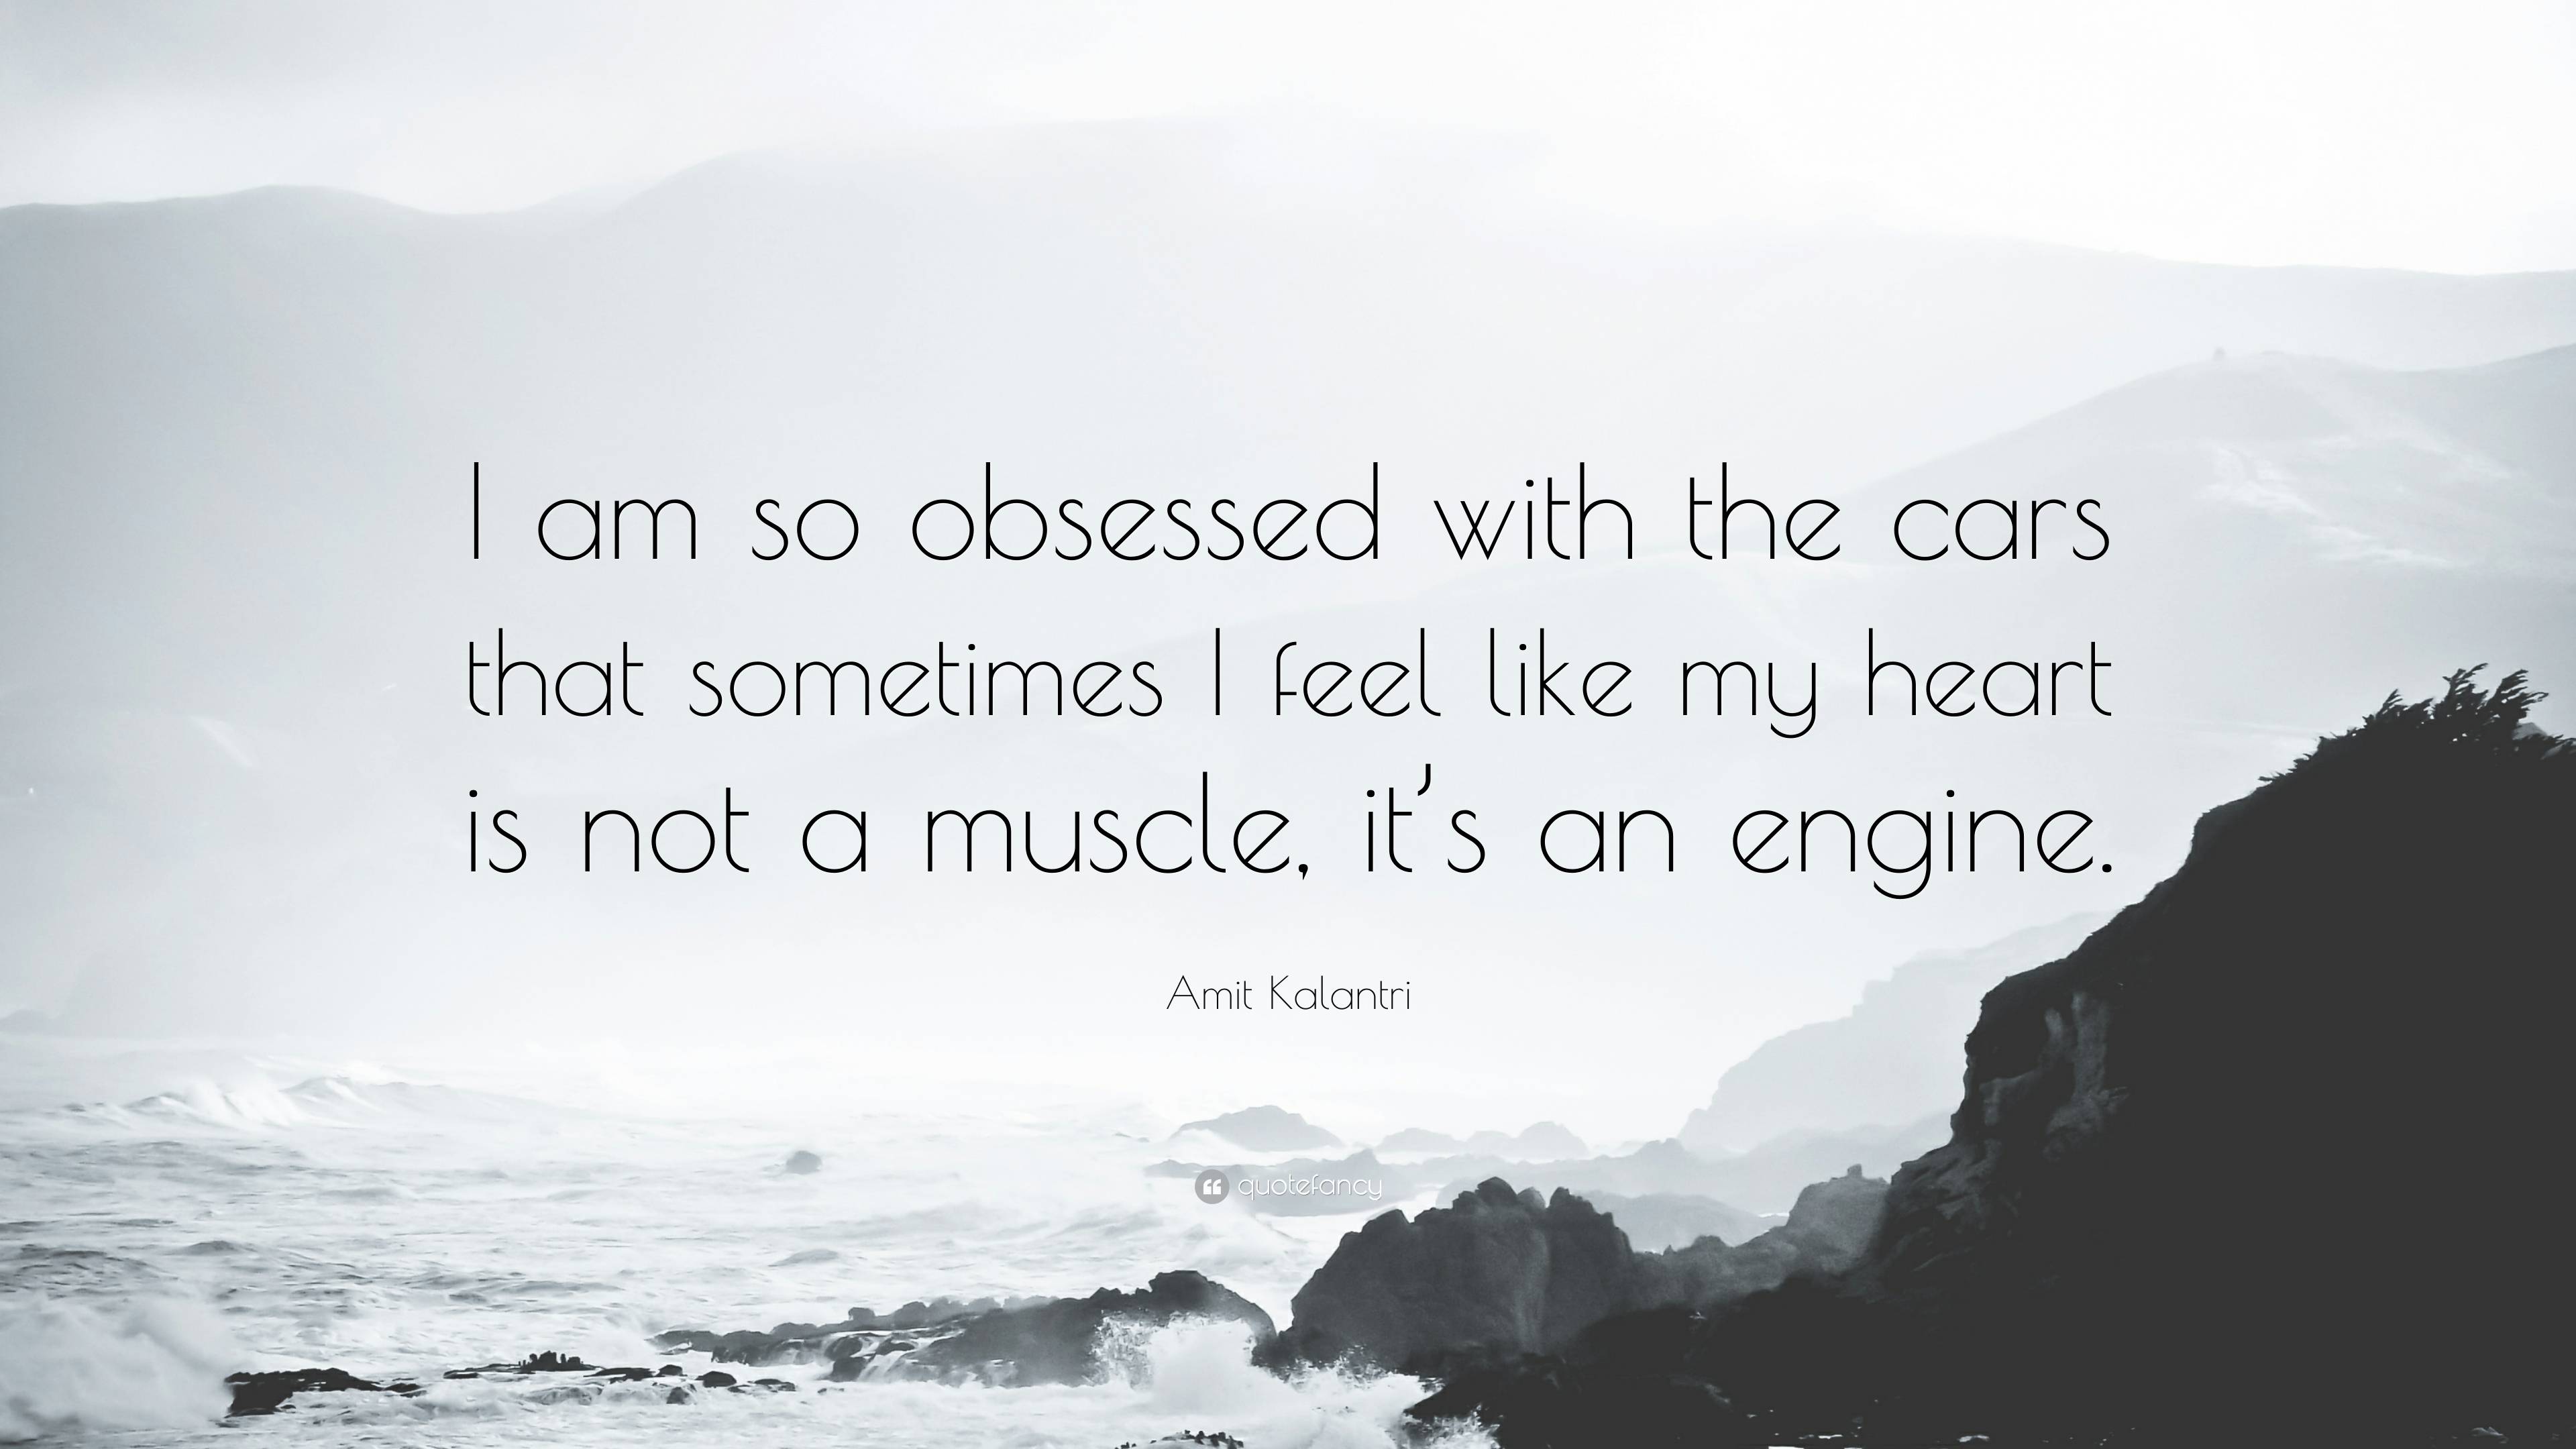 Amit Kalantri Quote: “I am so obsessed with the cars that sometimes I feel  like my